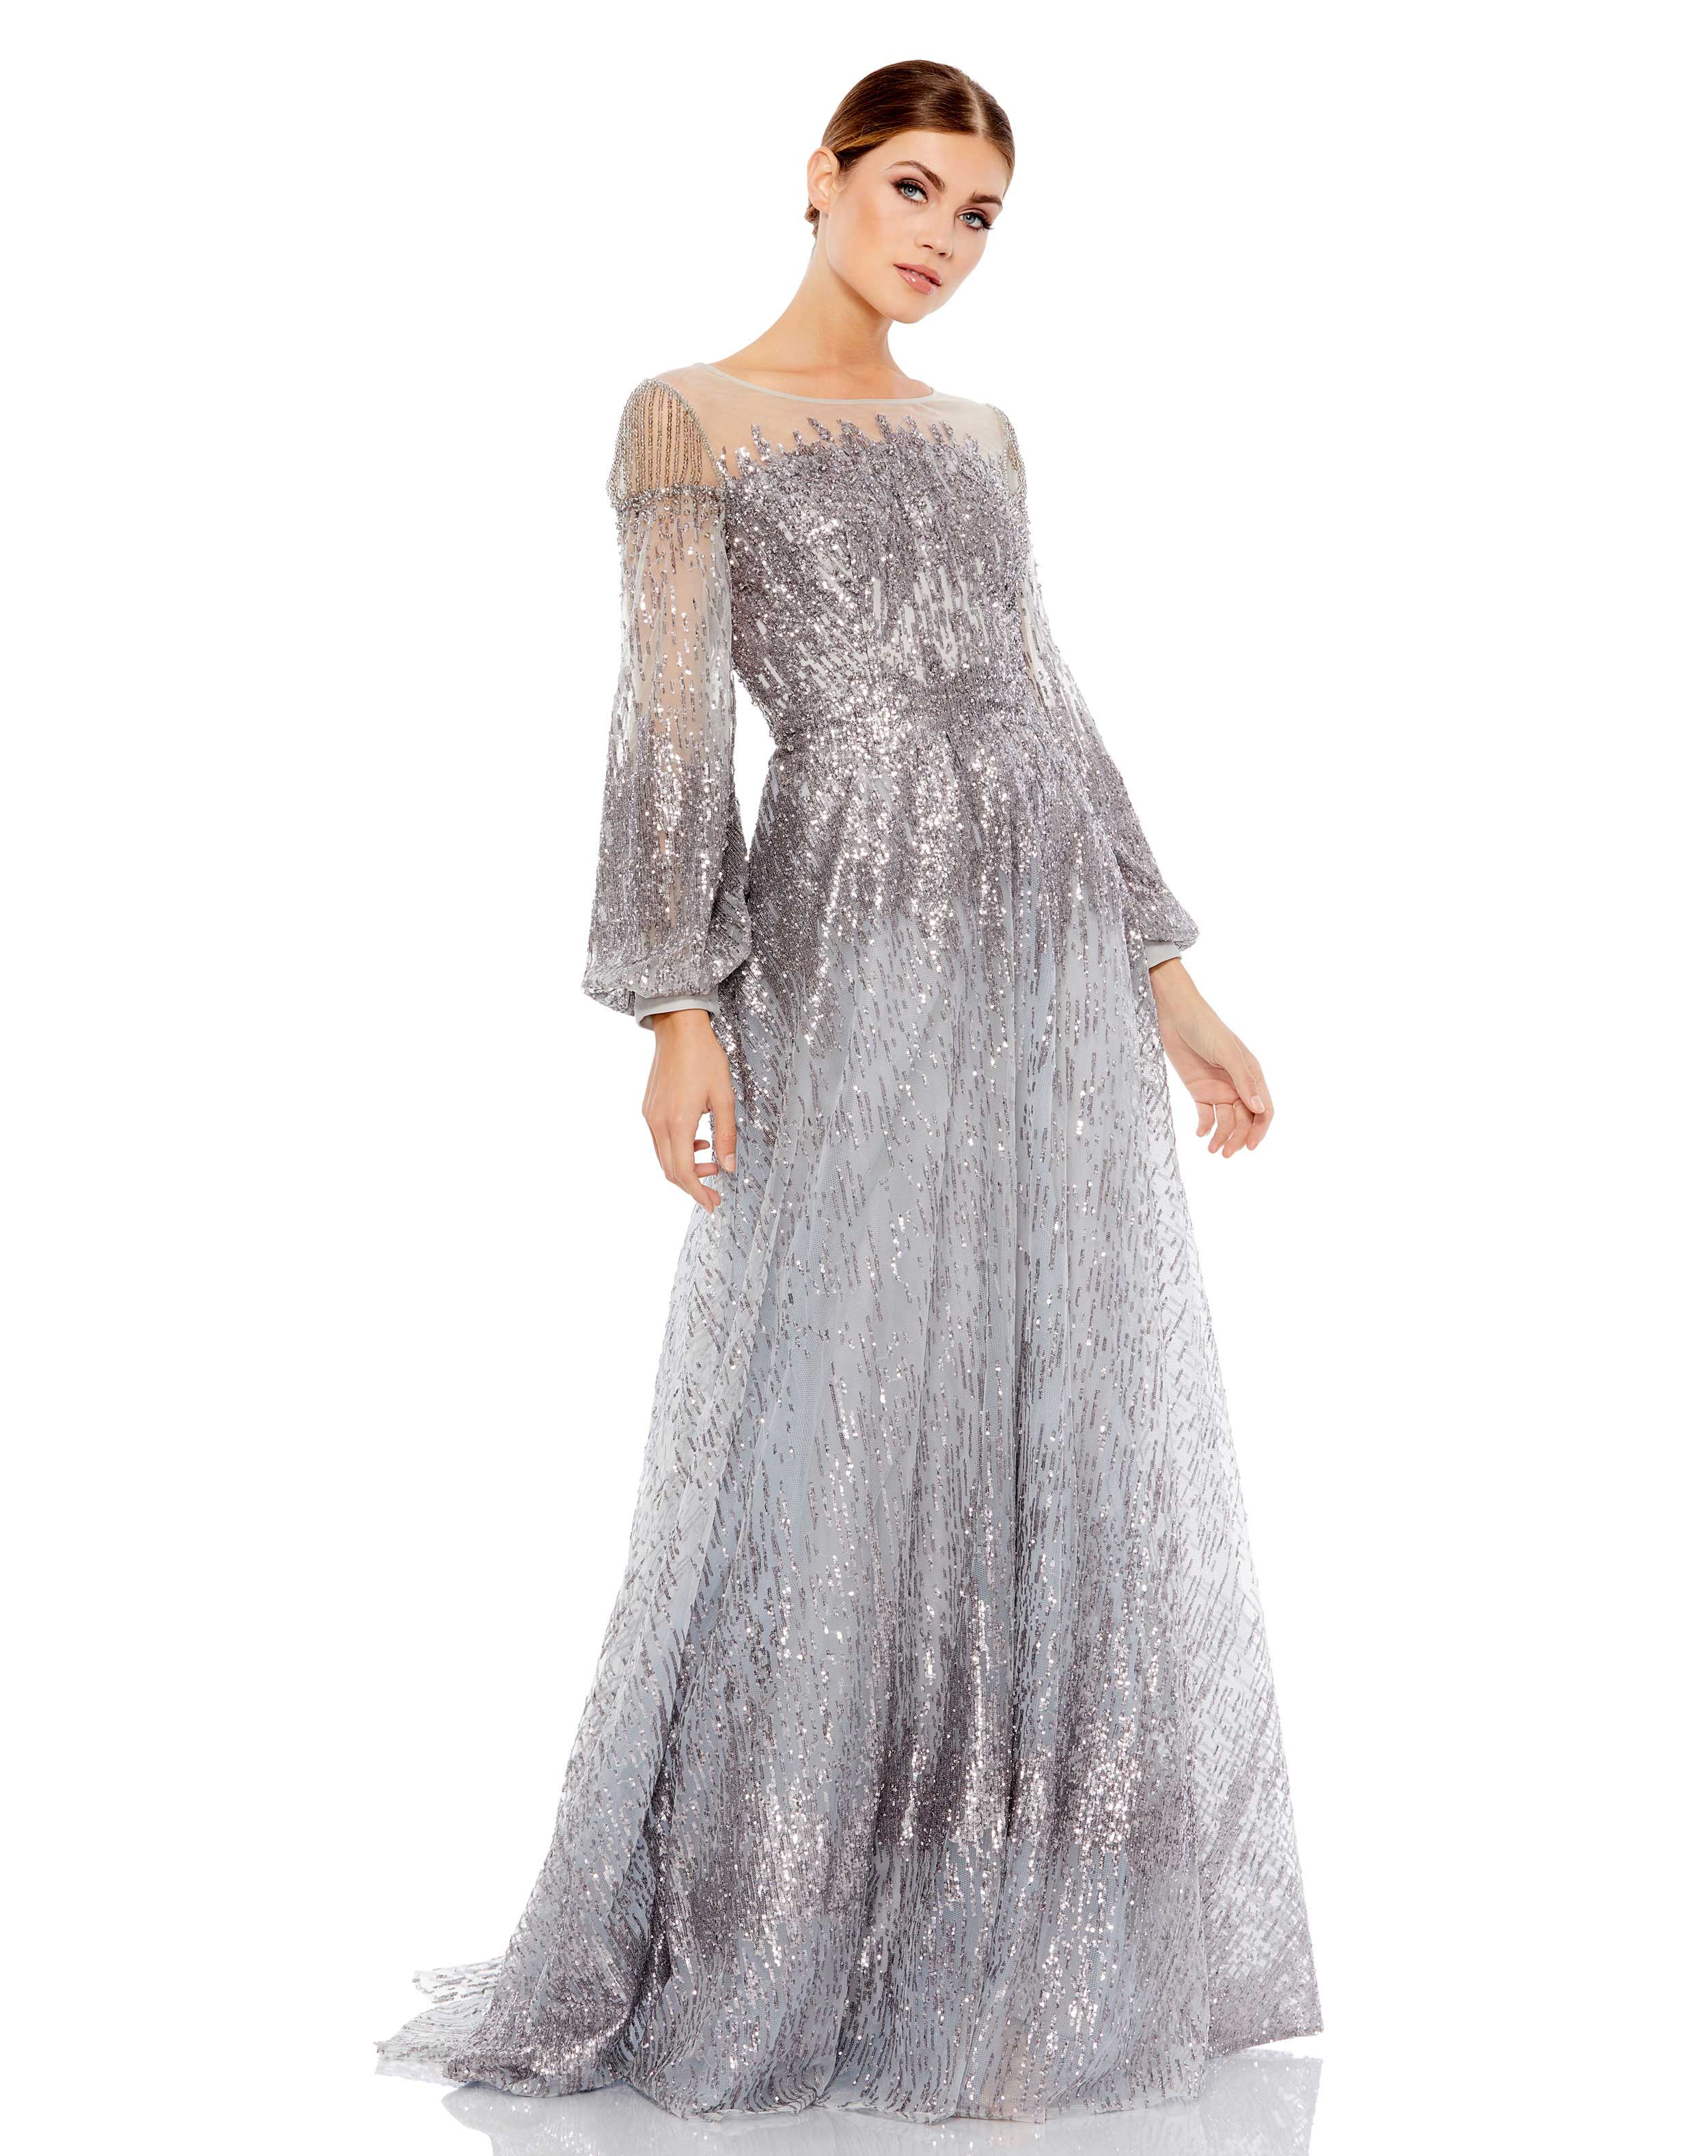 Jewel Encrusted Illusion Long Sleeve A Line Gown